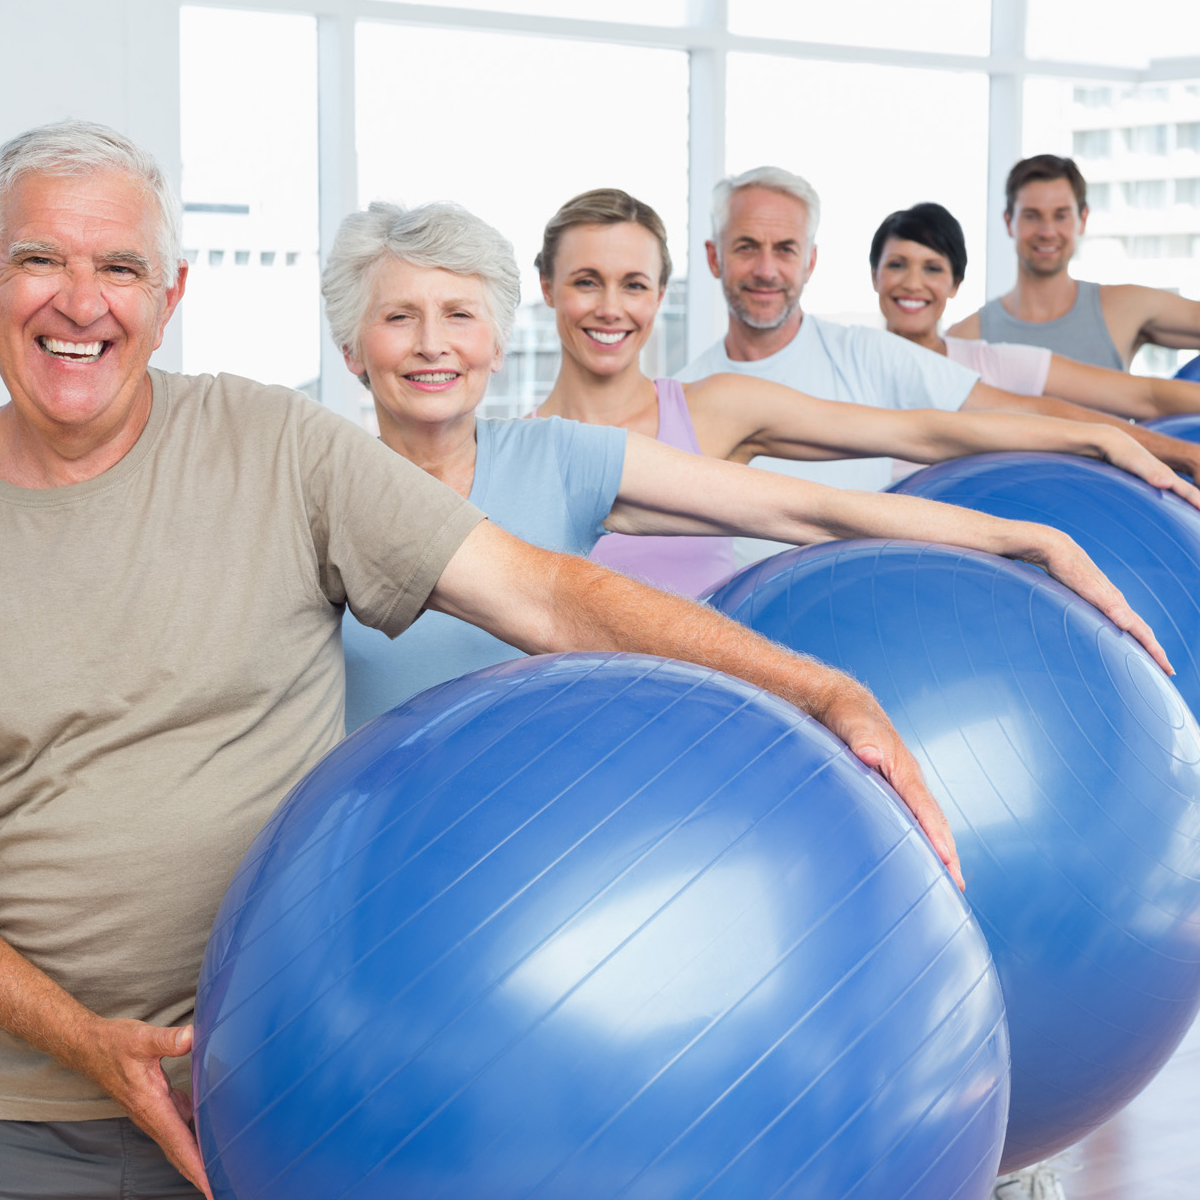 group of seniors and middle aged adults holding exercise balls